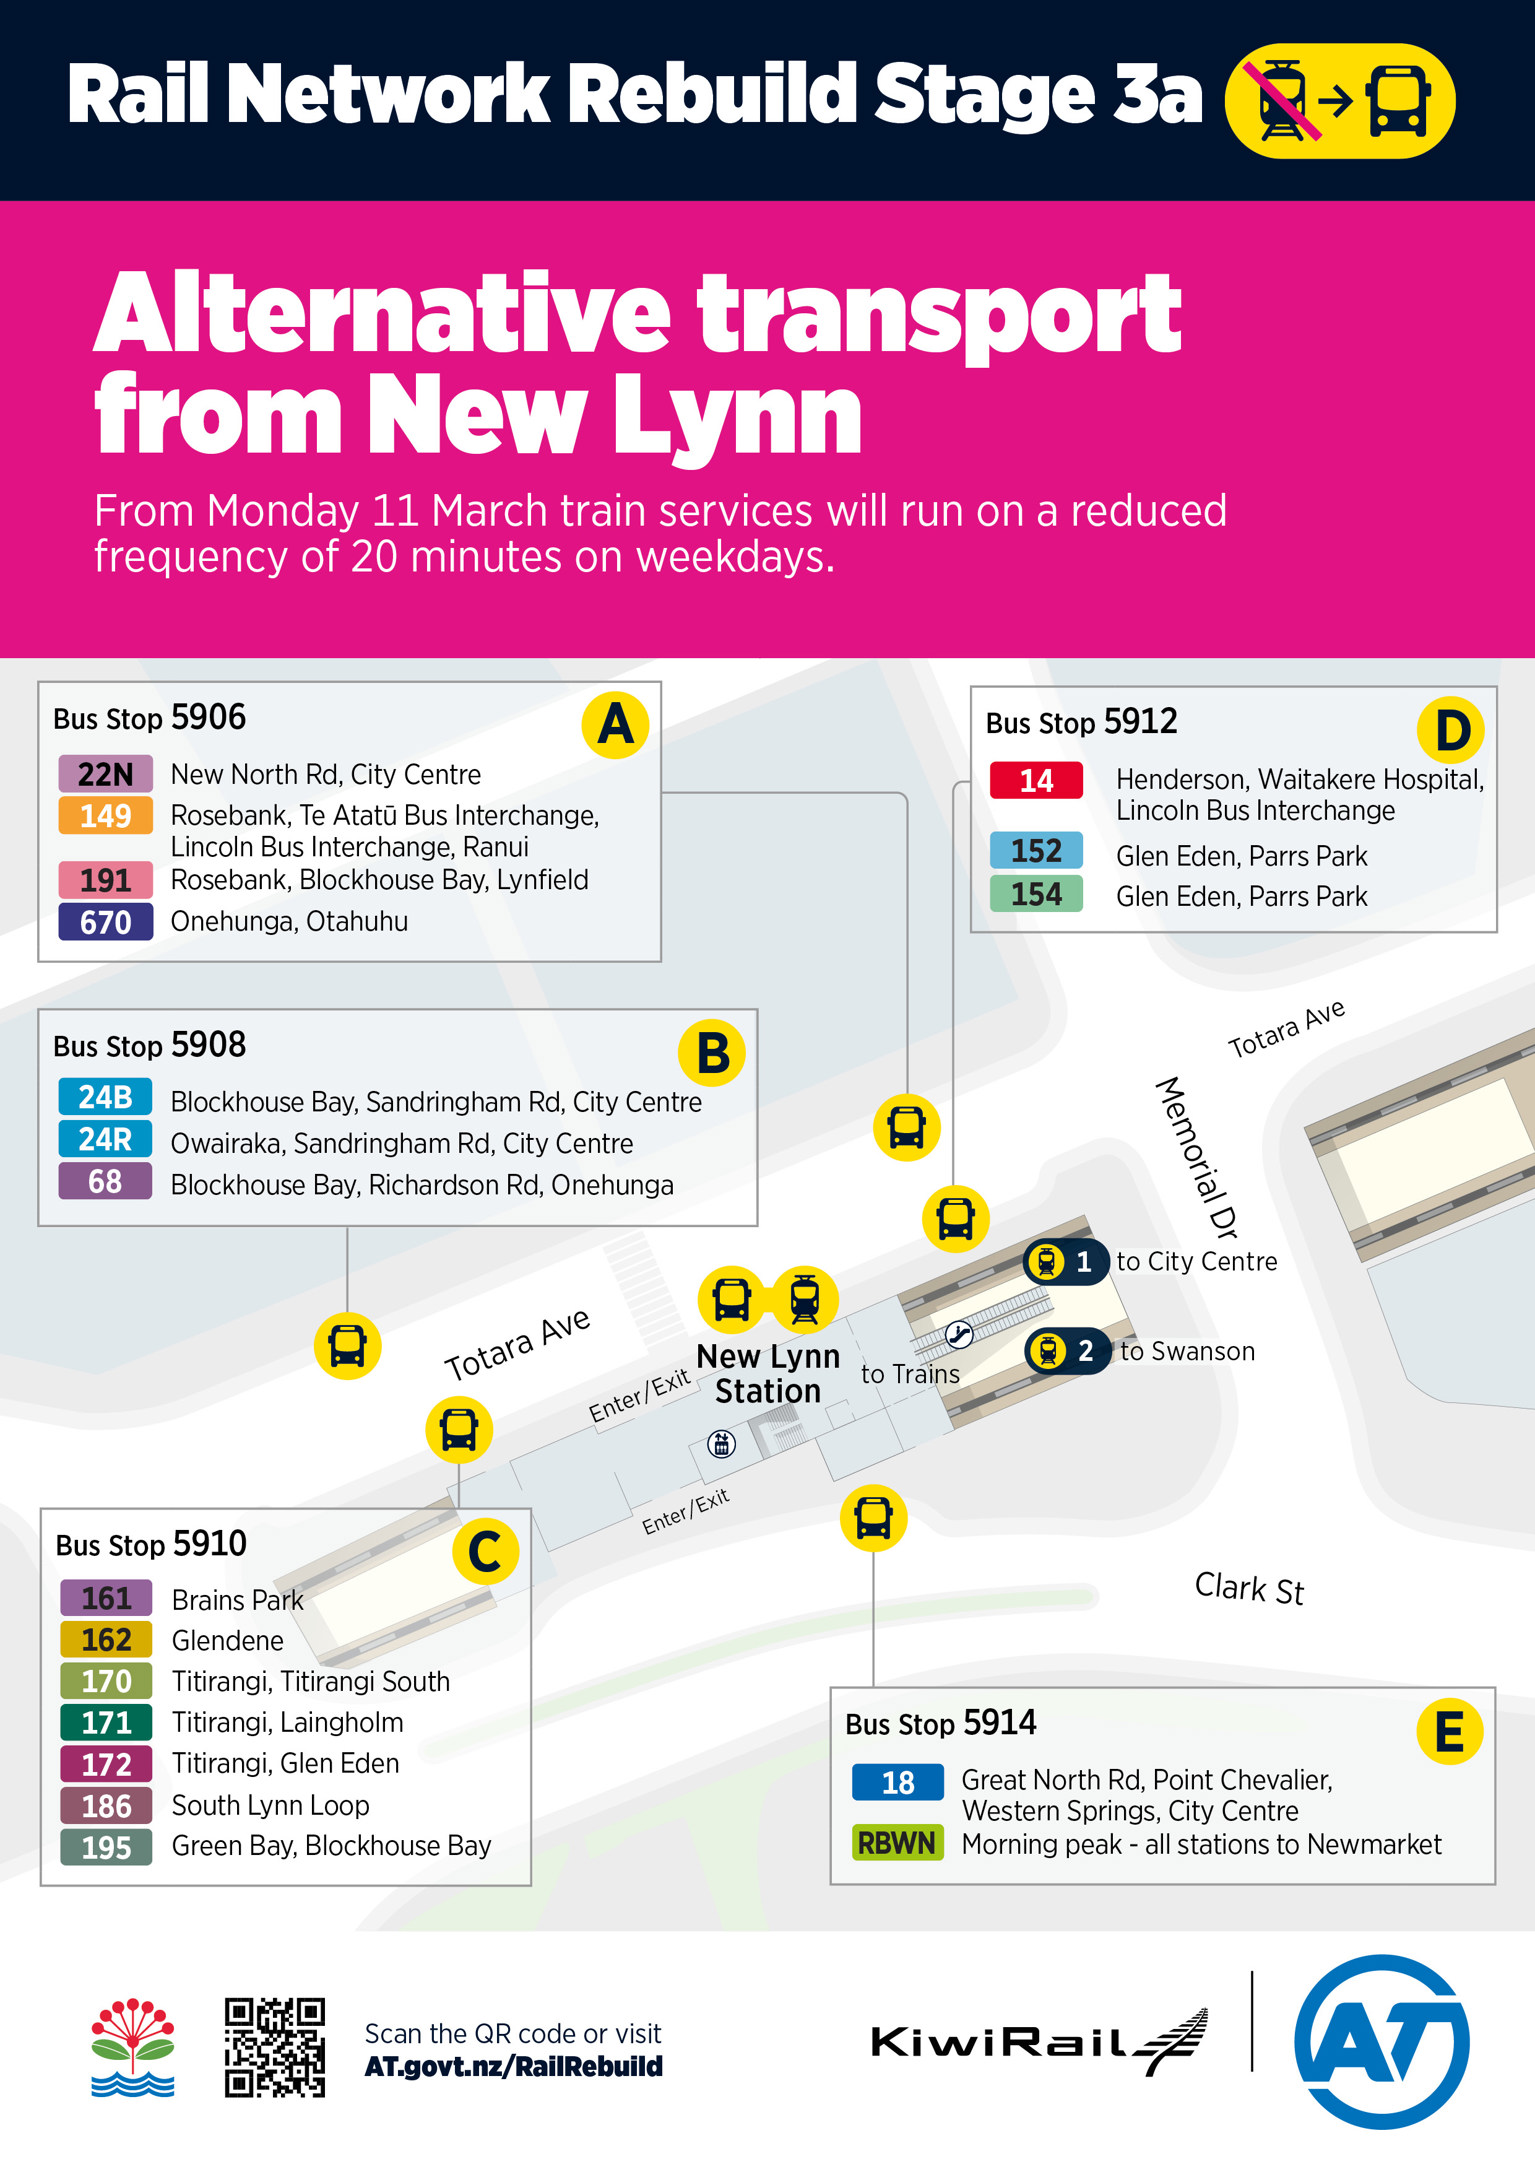 Poster showing alternative transport options from New Lynn Station during Stage 3 of the Rail Network Rebuild